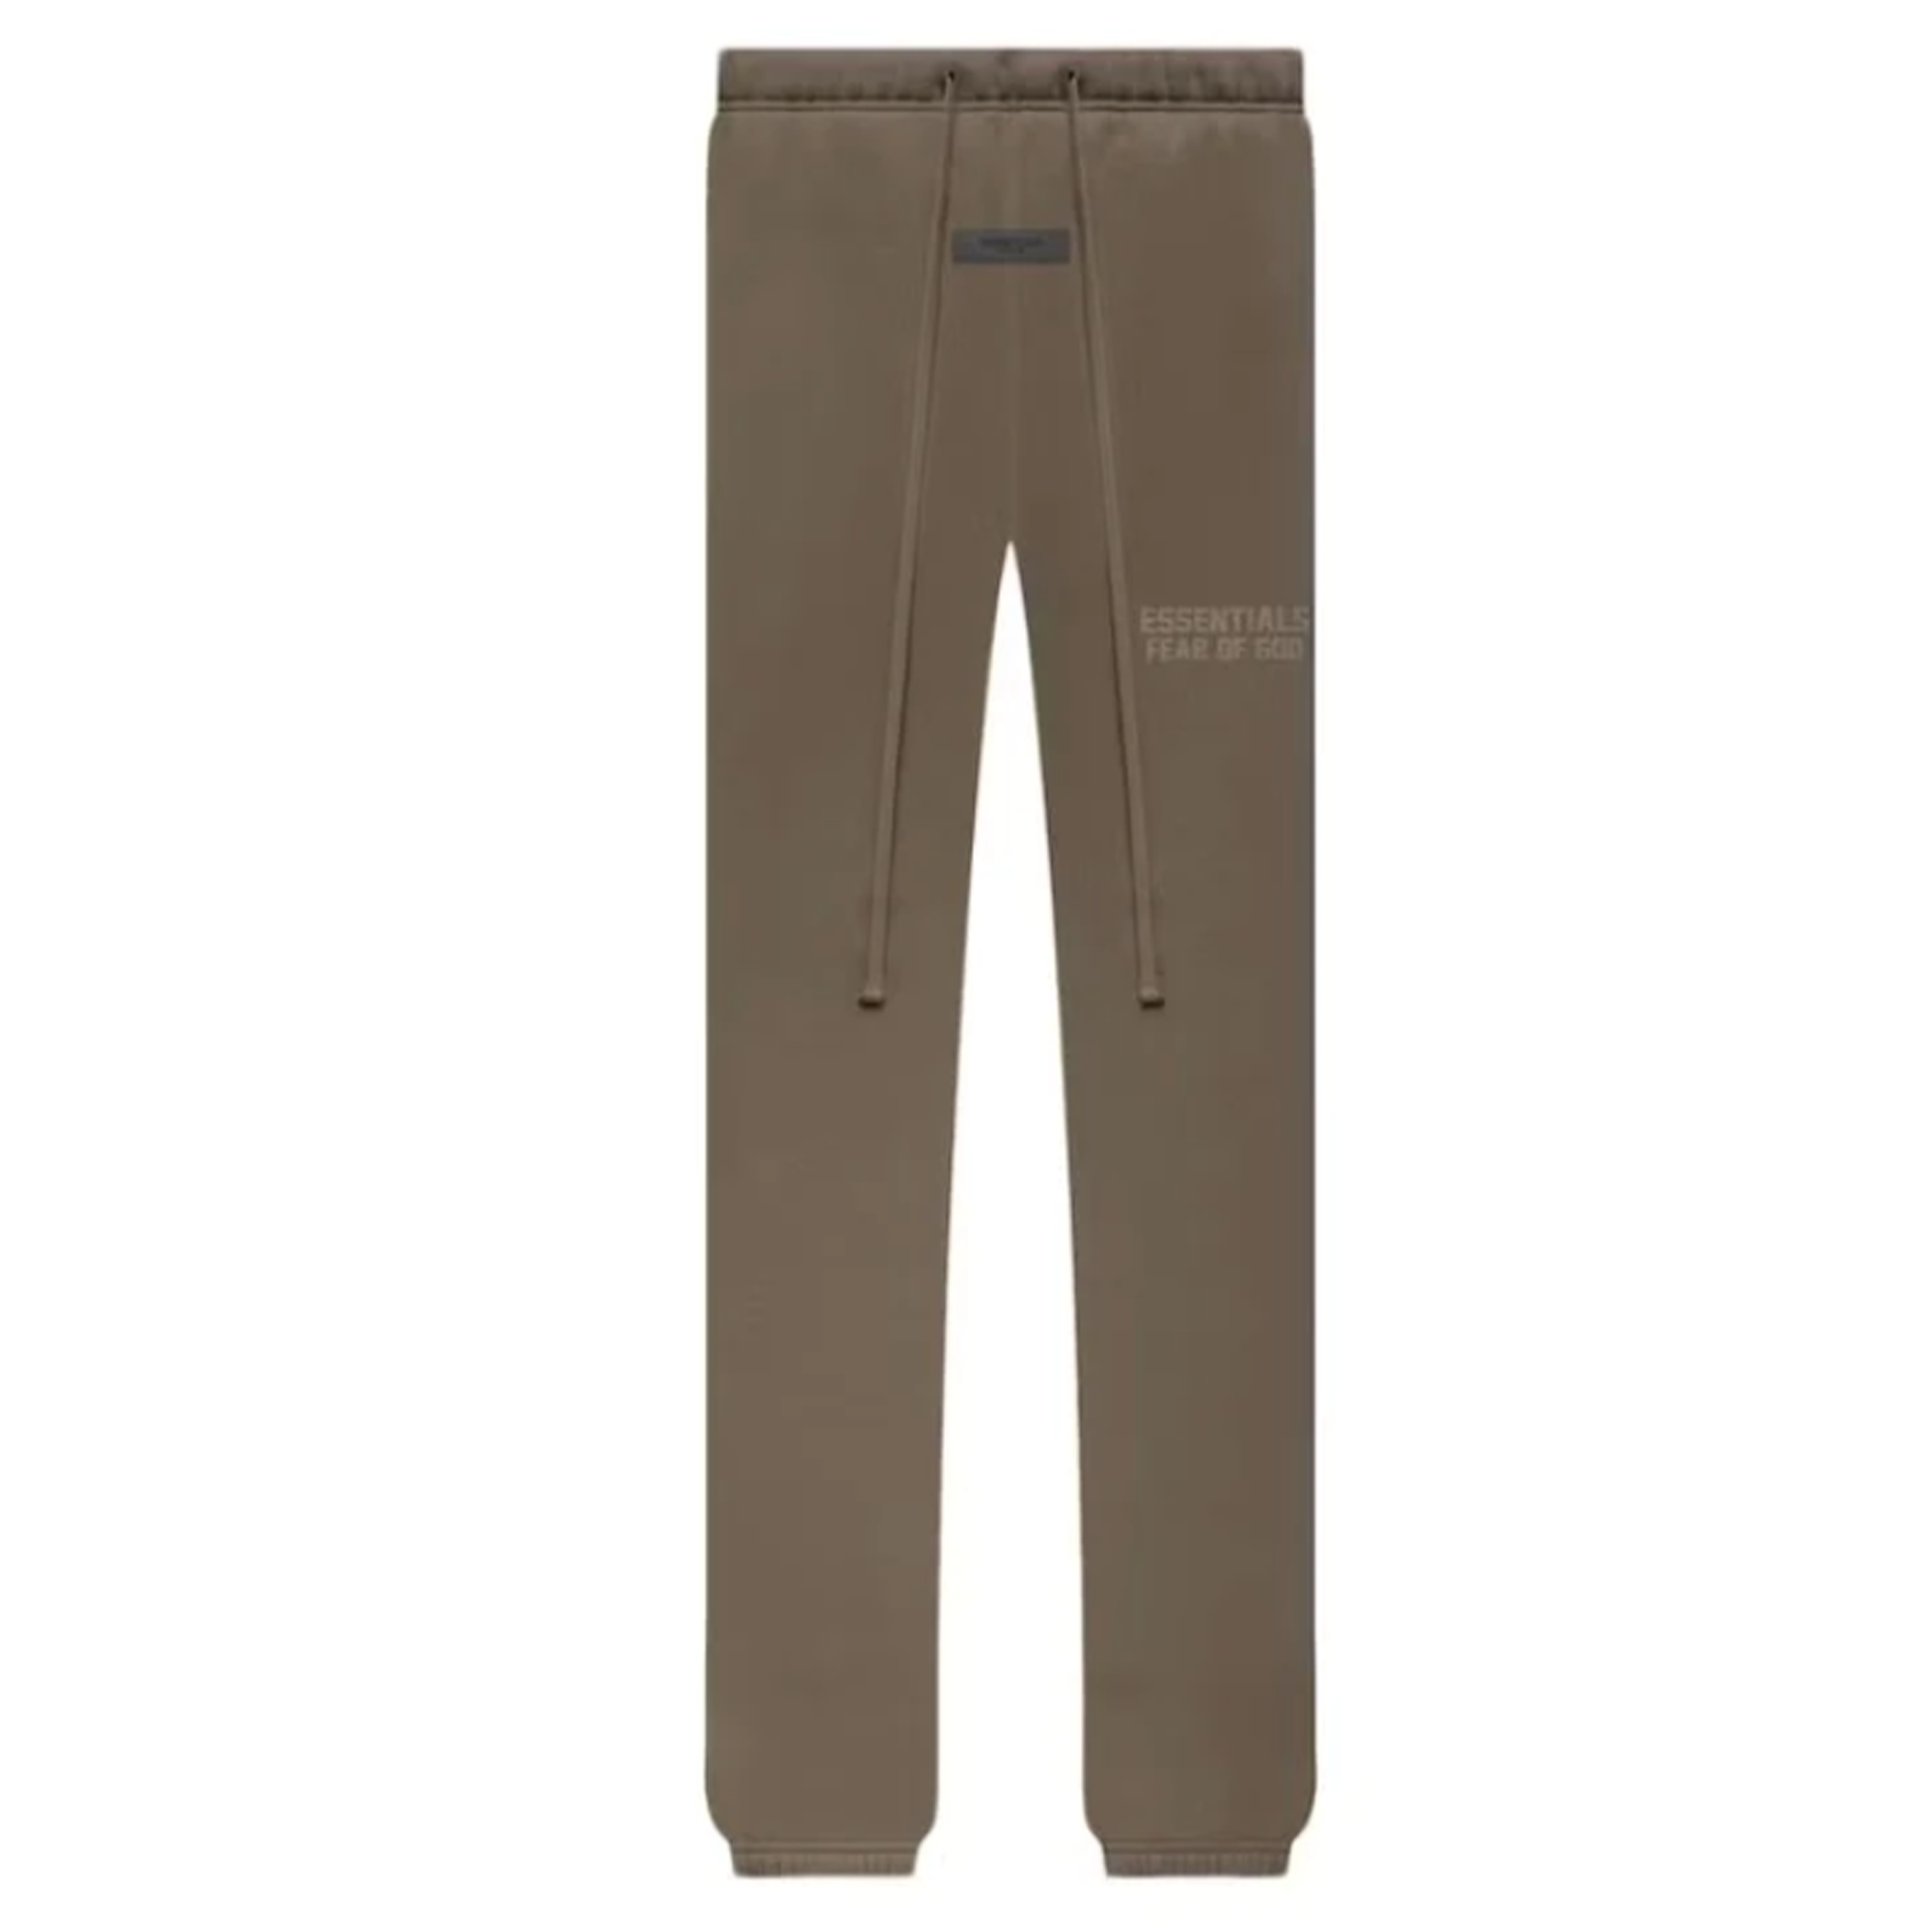 Fear Of God Essentials - Woman's "Brown Relaxed" Sweatpants Pants